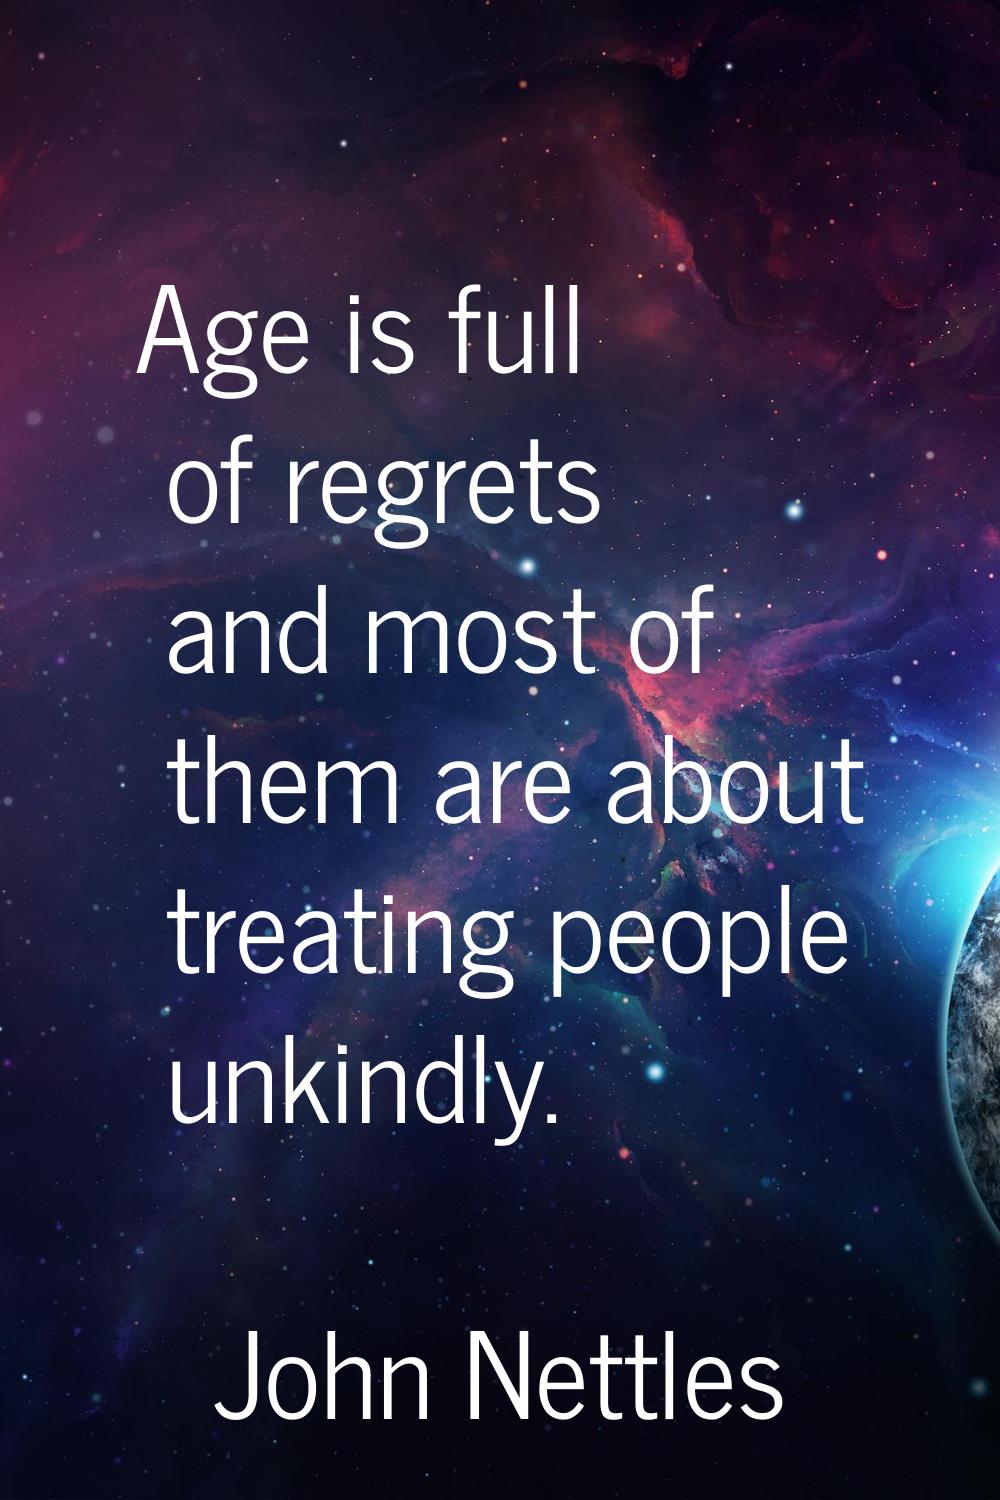 Age is full of regrets and most of them are about treating people unkindly.